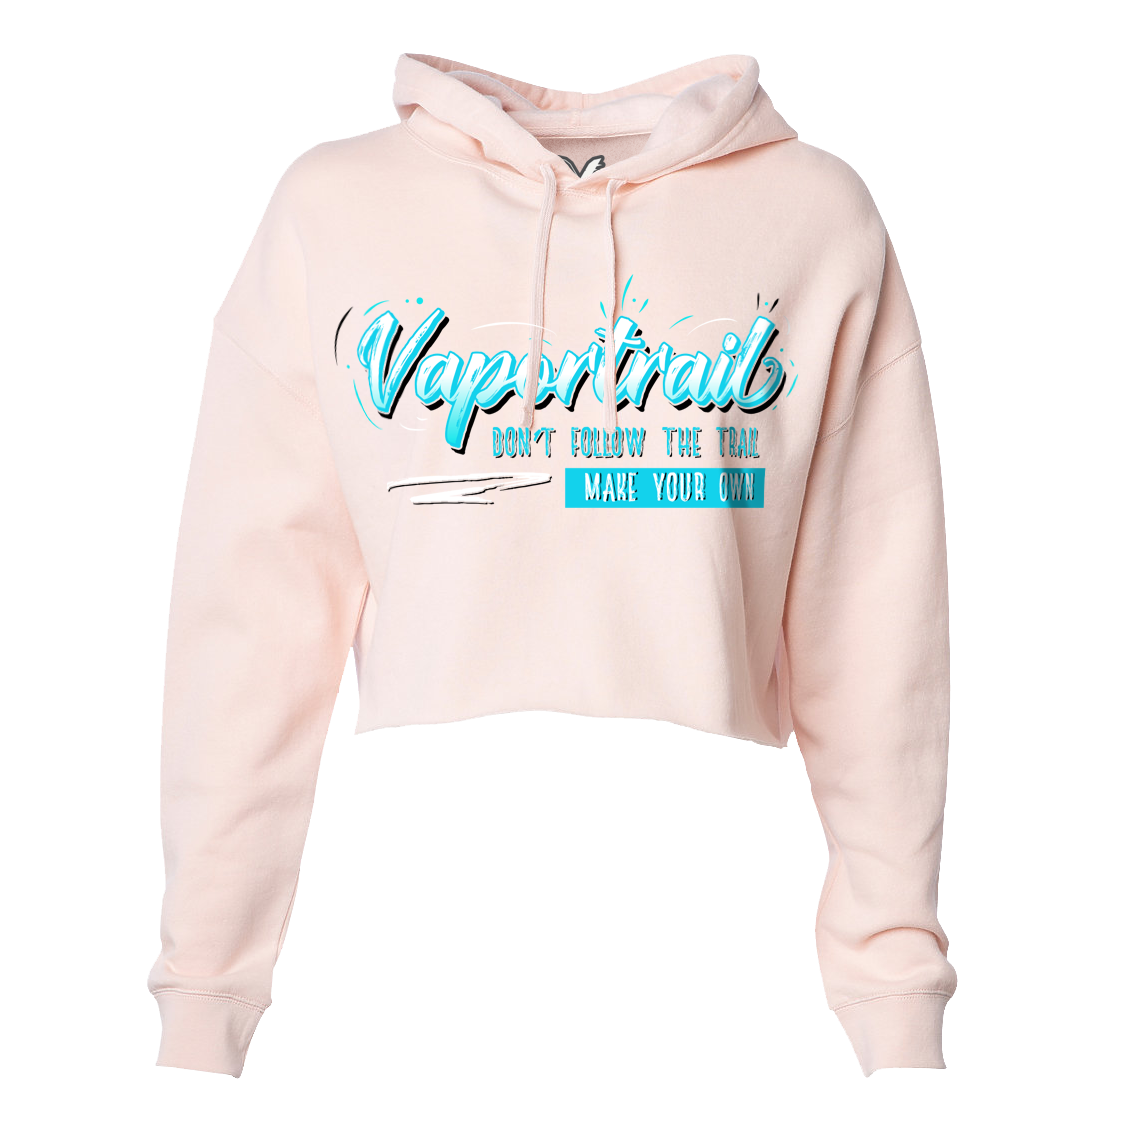 Vaportrail – Don't follow the trail. Make your own.